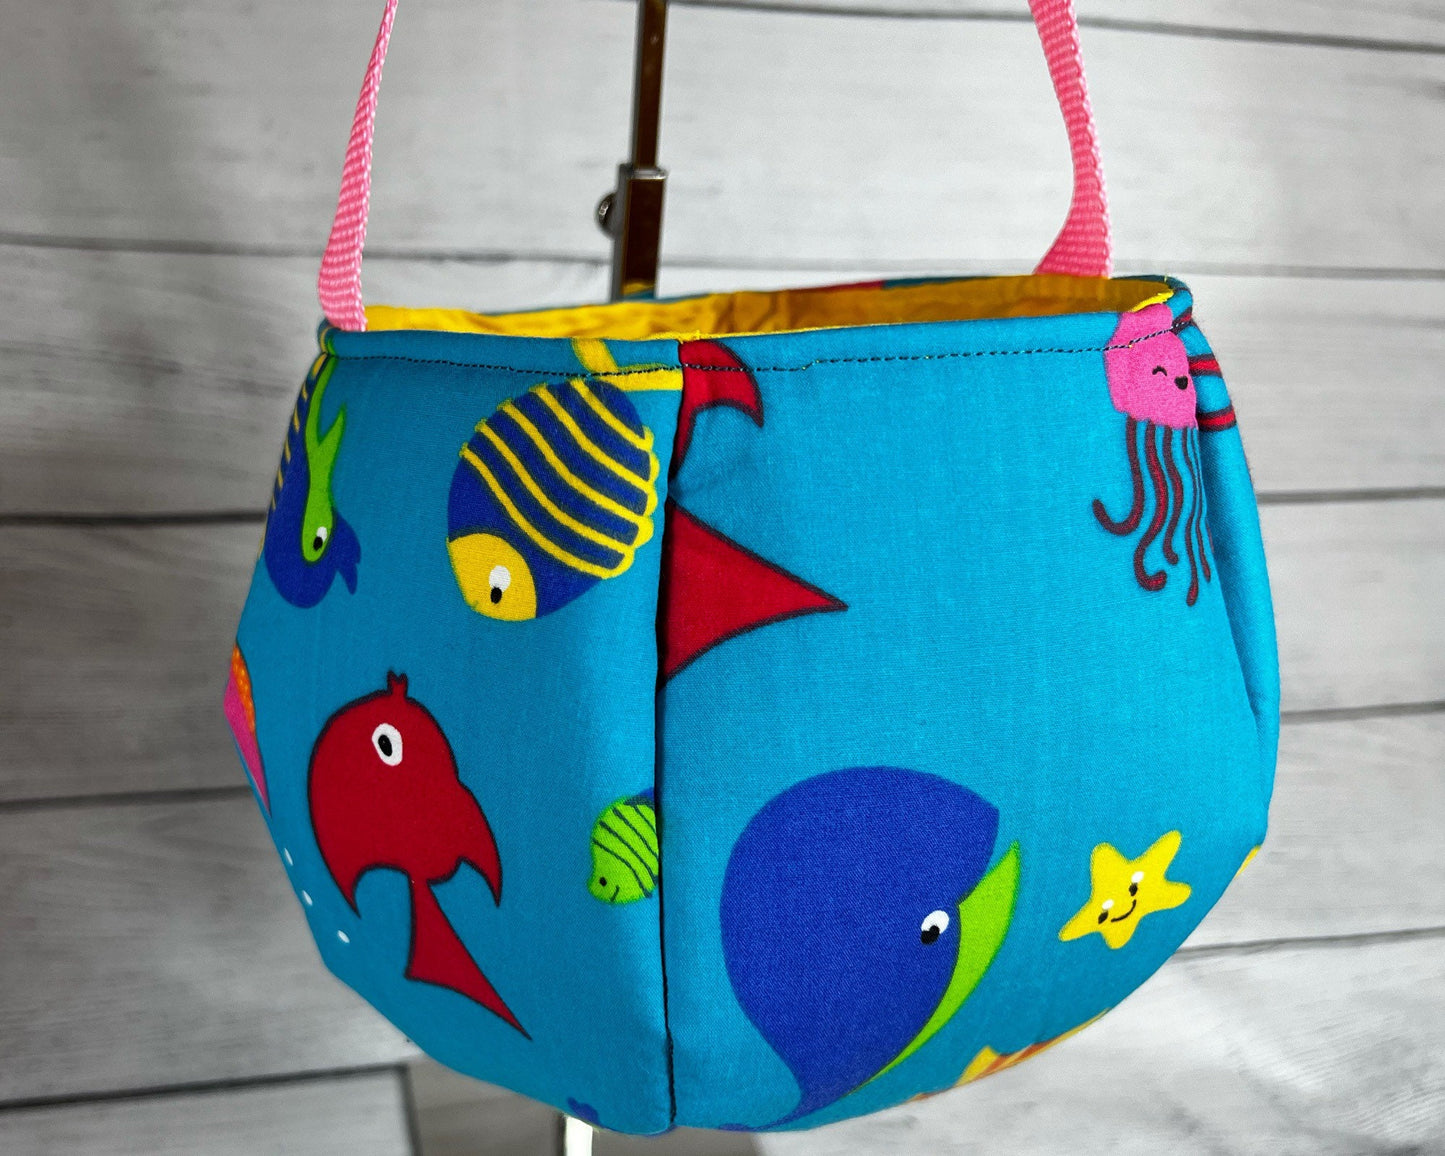 Ocean Tote Bag - Bag - Tote - Fish - Whale - Octopus - Jellyfish - Cartoon Ocean - Party - Gift - Everyday - Holiday - Easter - Halloween